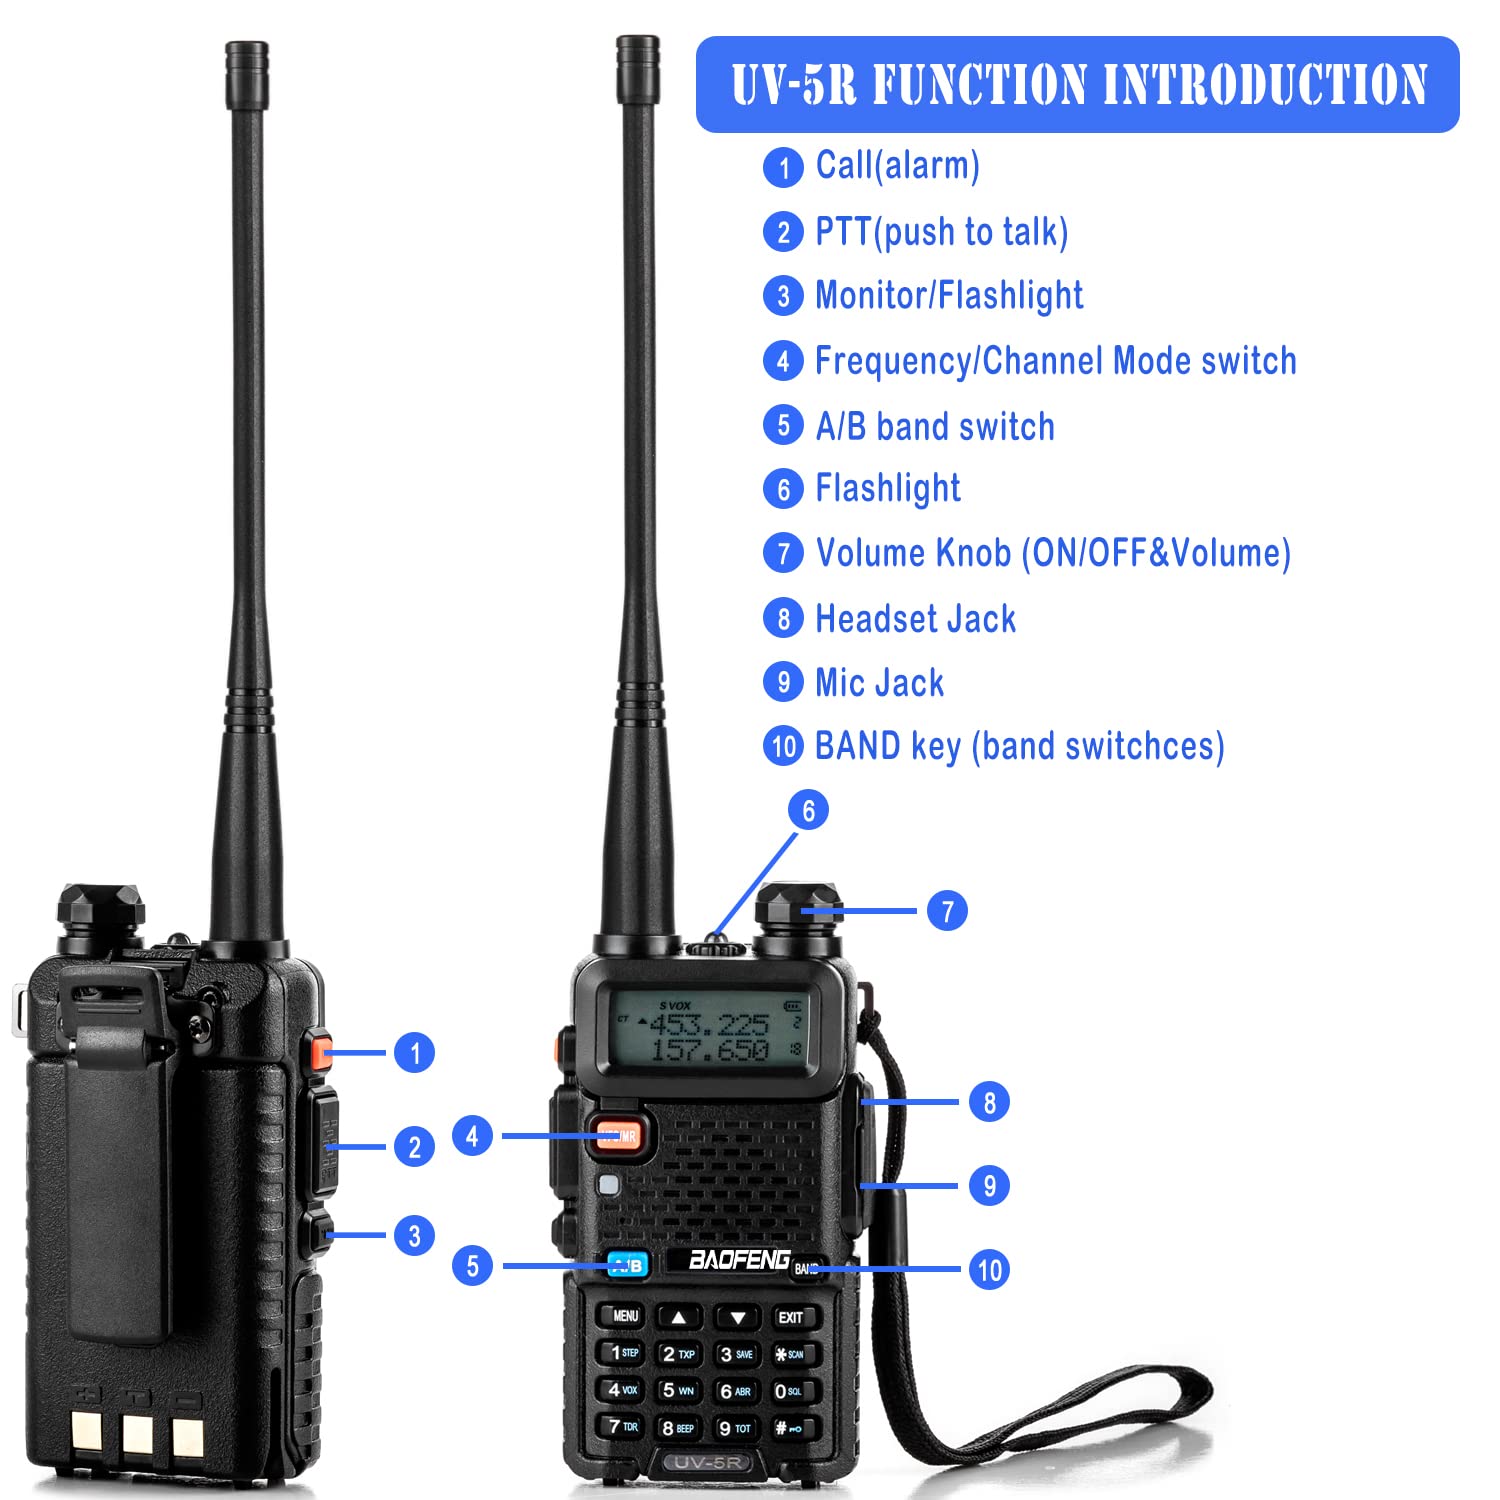 BAOFENG UV-5R Radio (VHF & UHF) with 2 Rechargeable Batteries, Long Range Handheld Ham Radios with High Gain Long Antenna and Earpiece(2 Pack)